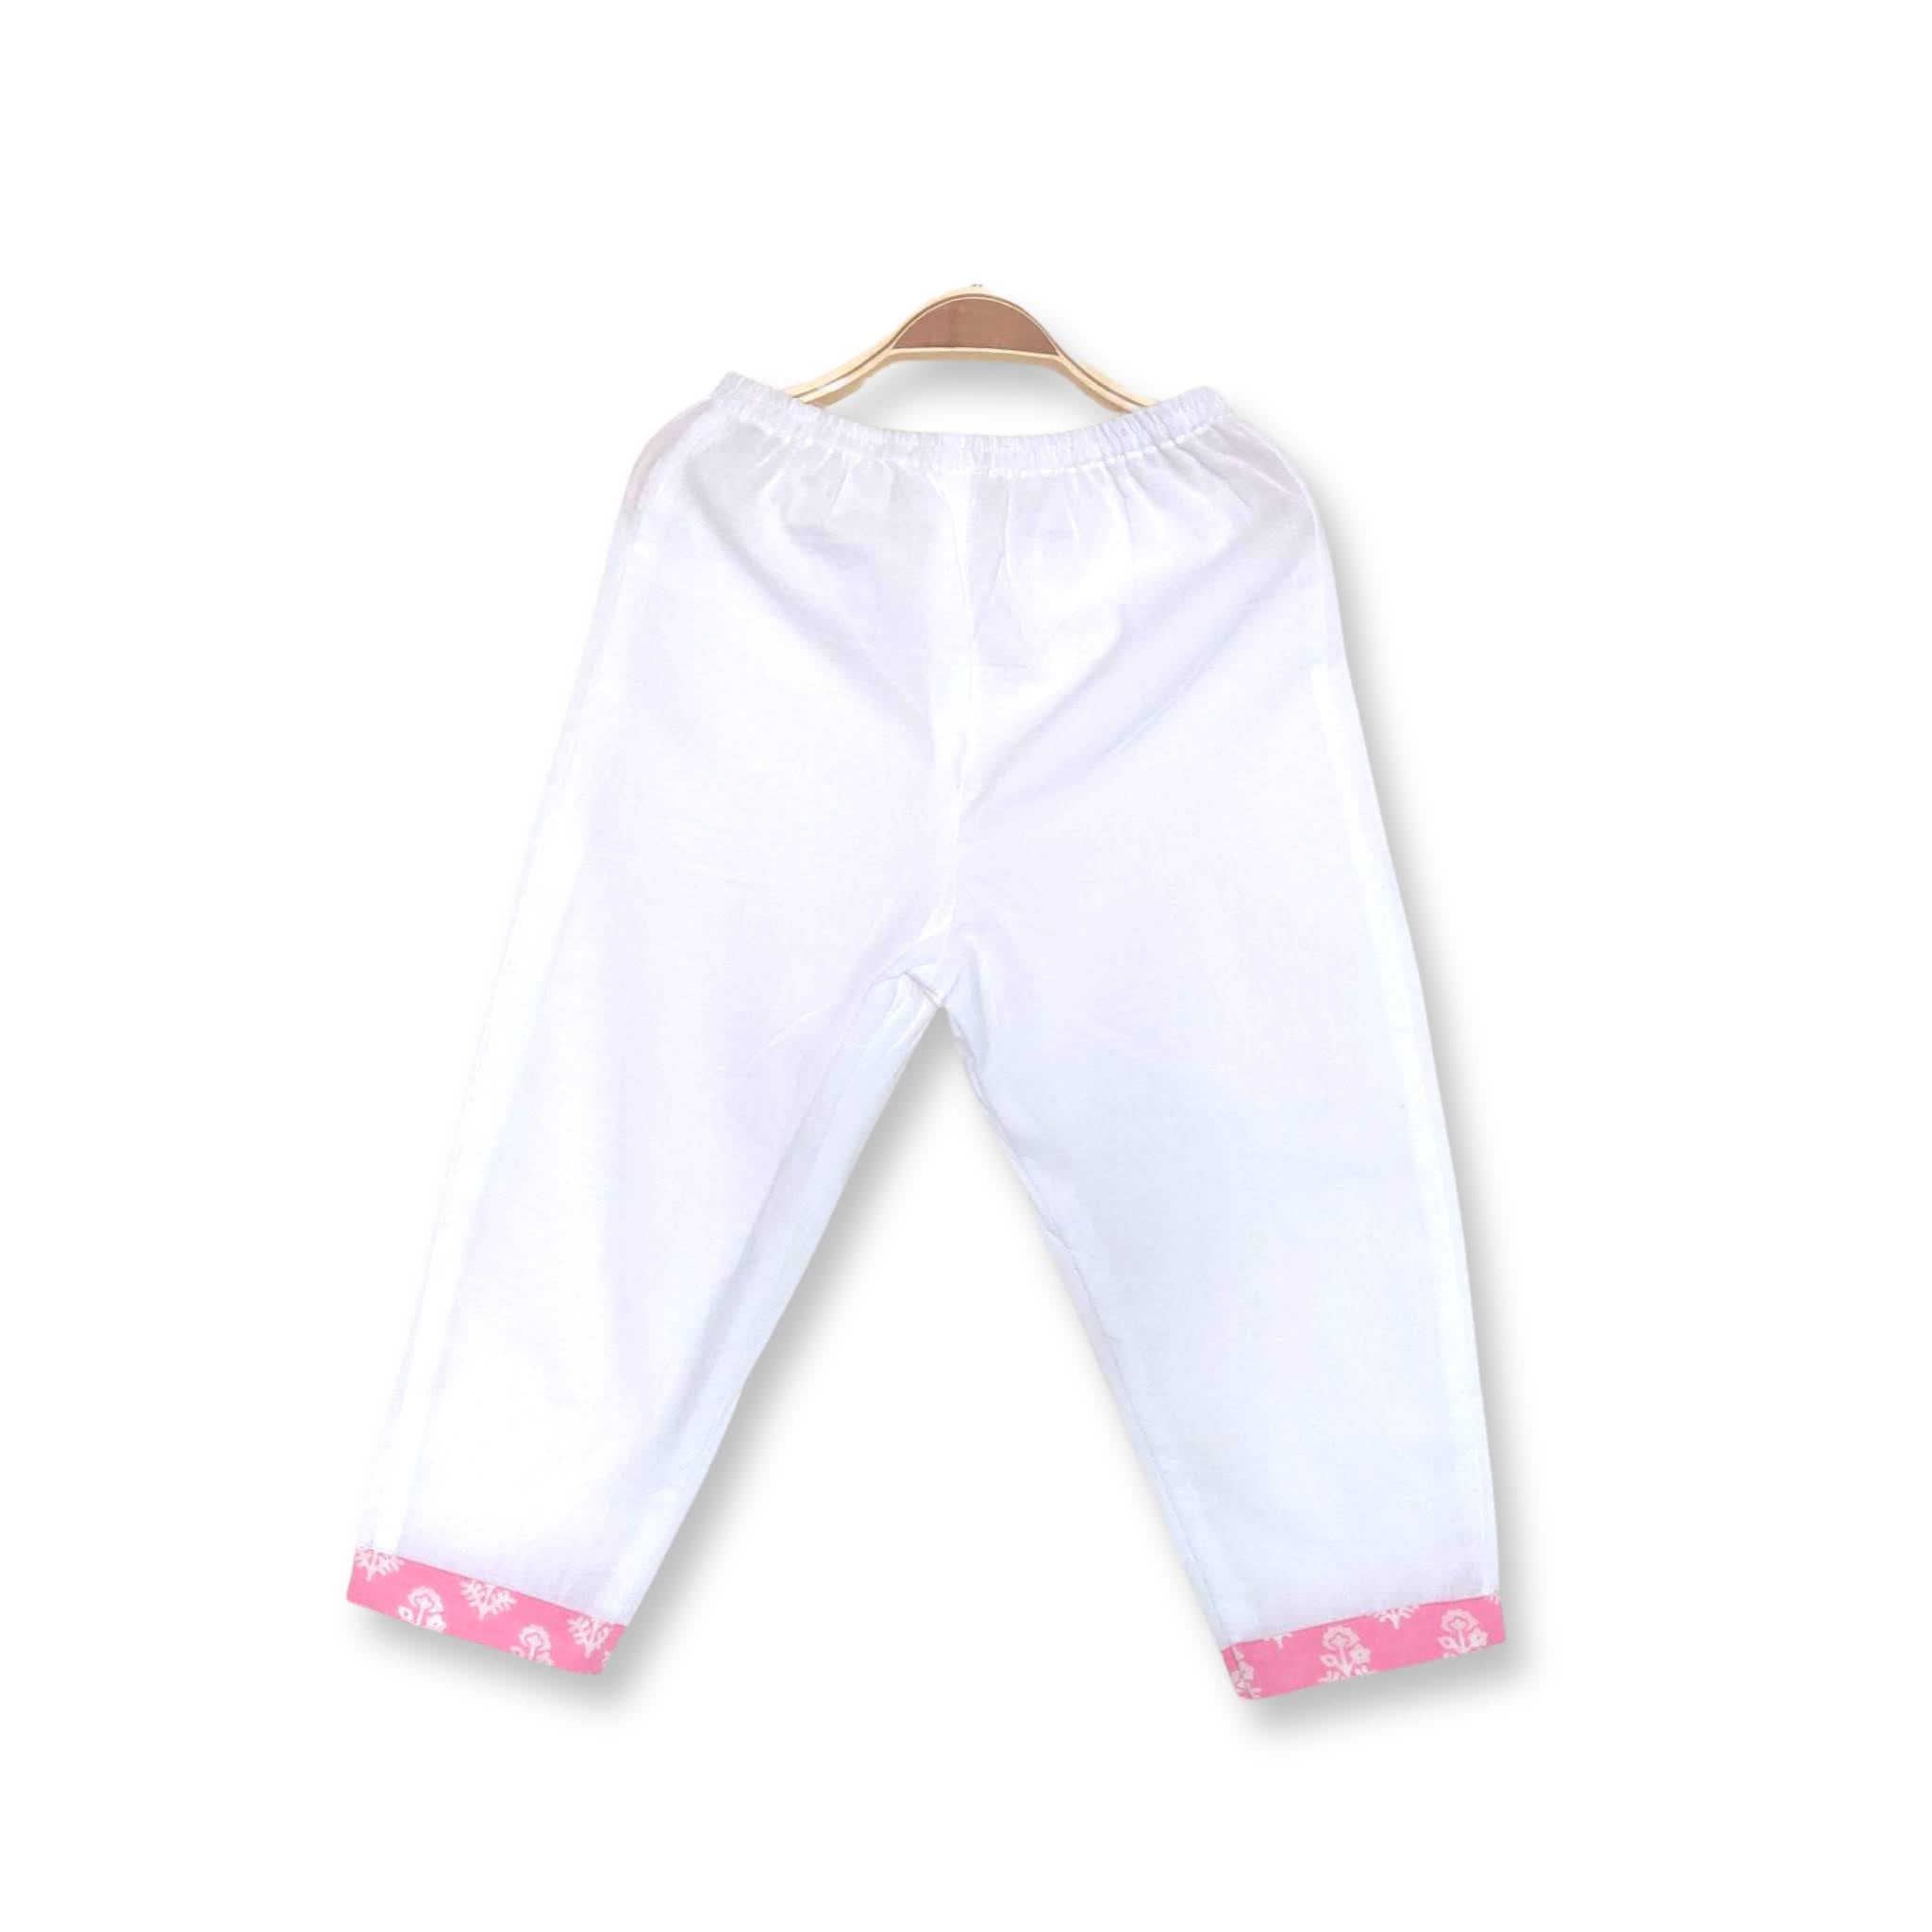 Sneaky Link  Cargo Link Pants White  Girls With Gems  Girls with Gems